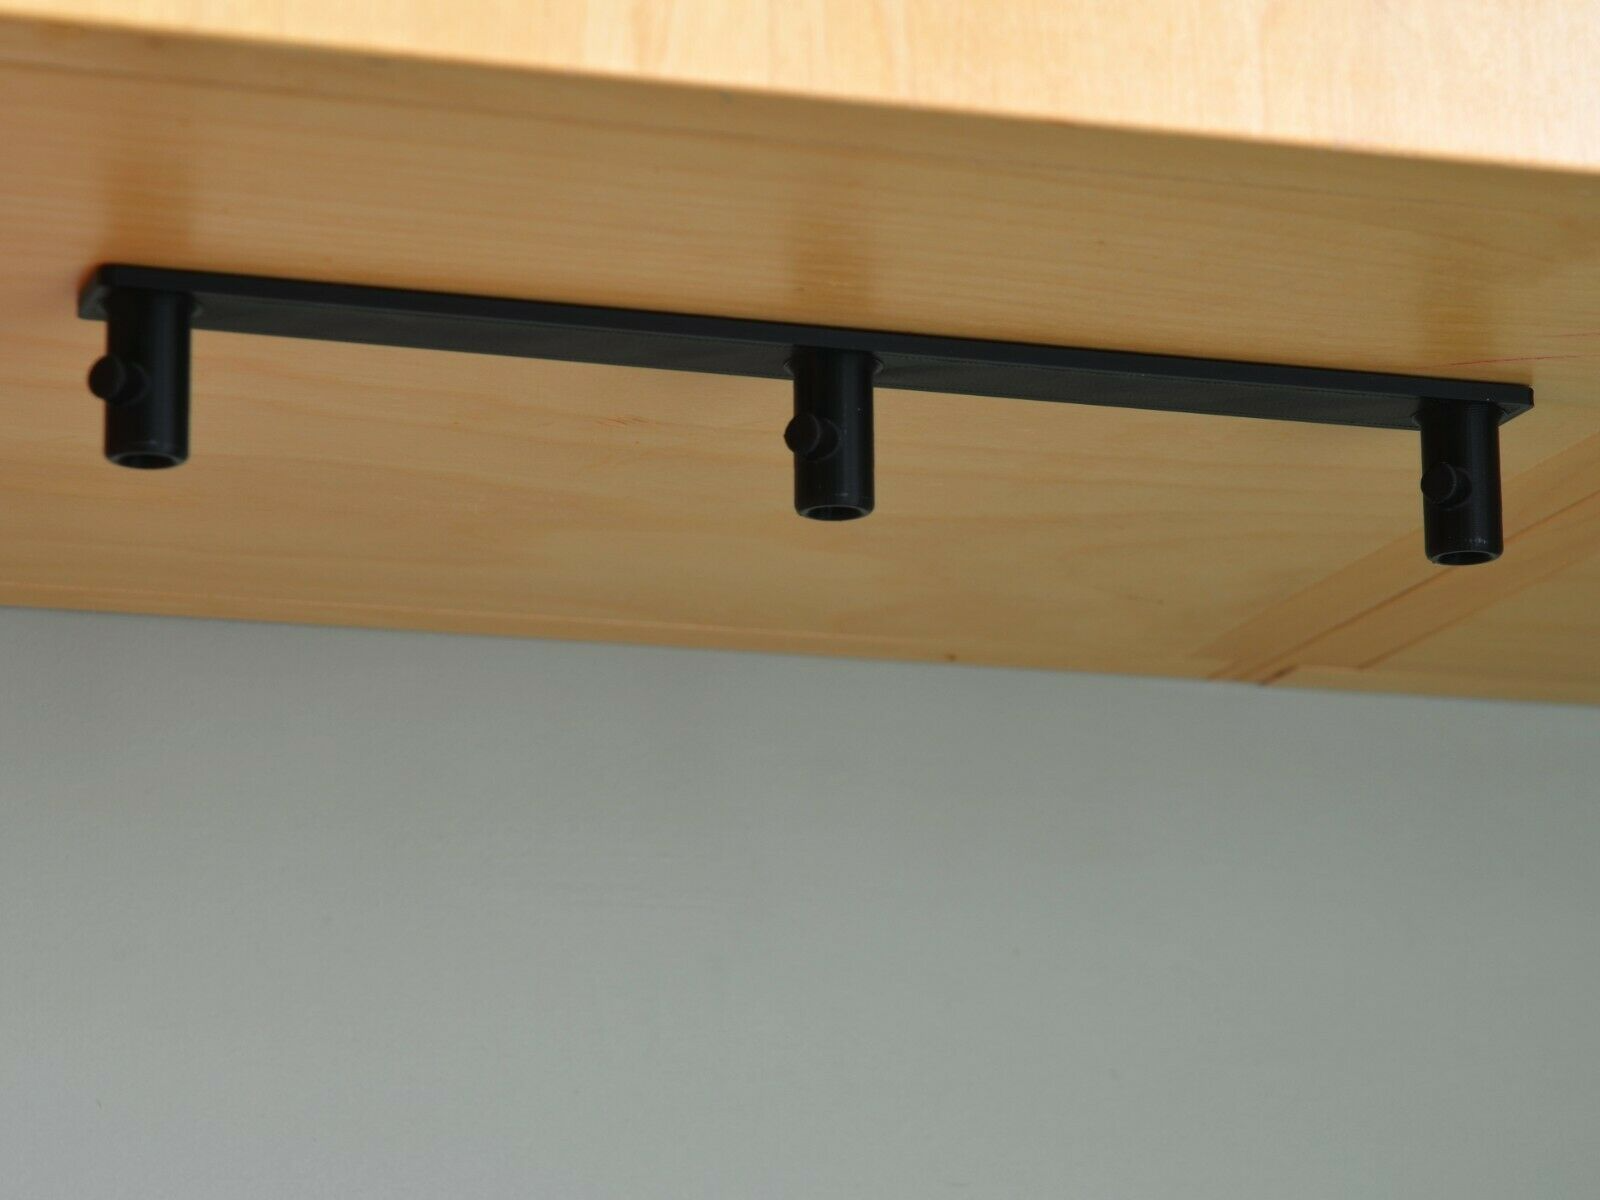 White Kitchenaid Mixer Attachment Hanger Improve the Storage of Your  Whisks, Hooks and Paddles Under a Shelf or Cabinet 